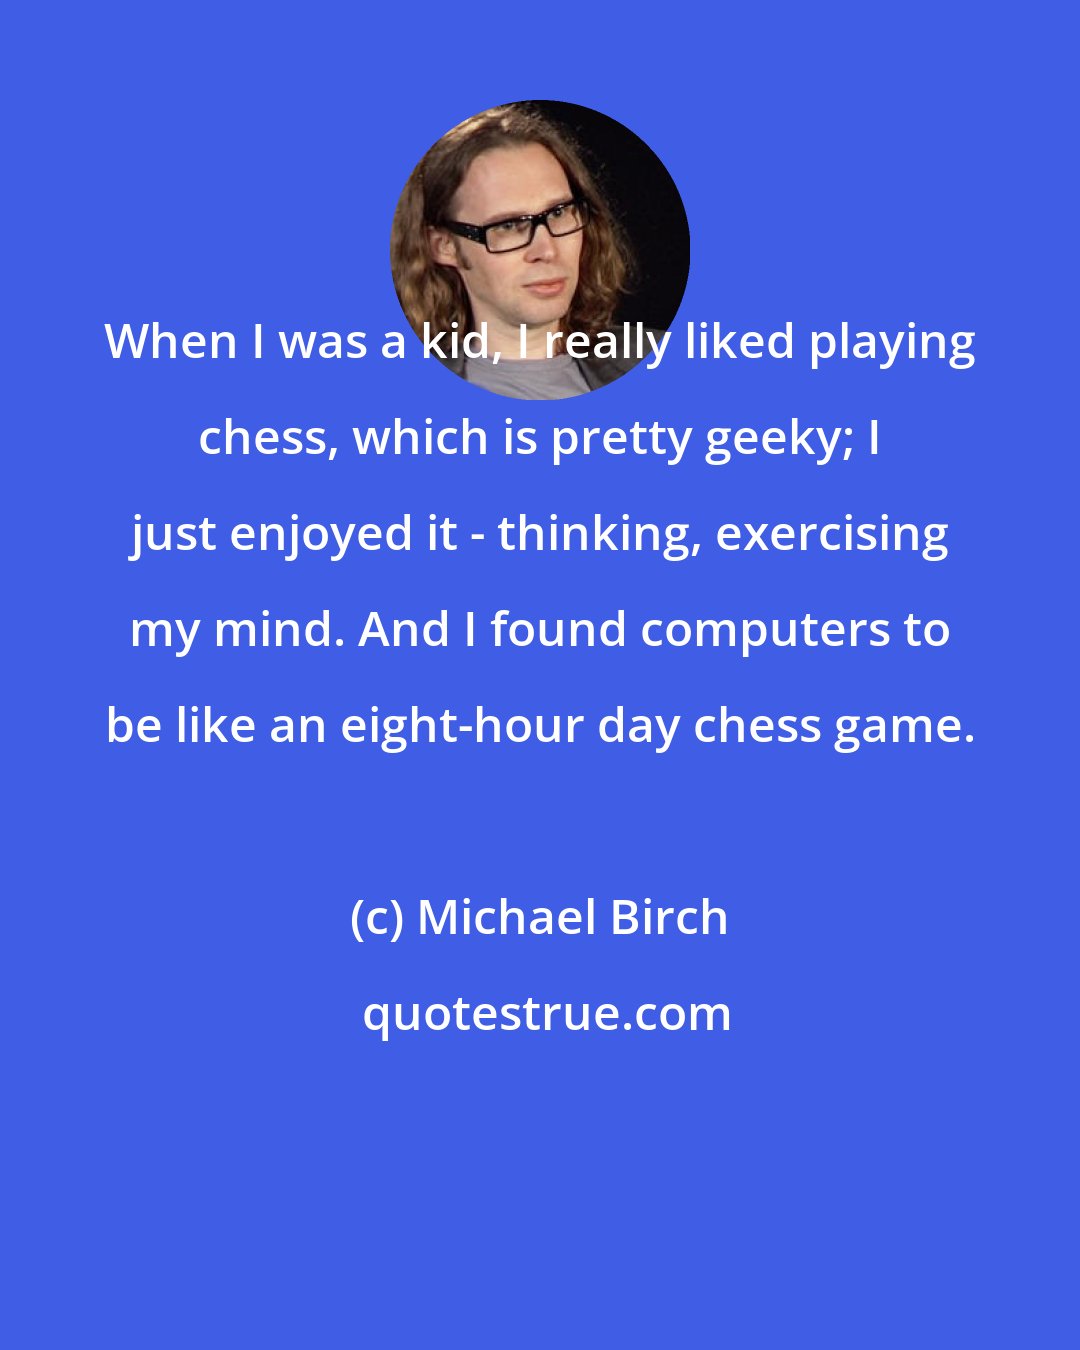 Michael Birch: When I was a kid, I really liked playing chess, which is pretty geeky; I just enjoyed it - thinking, exercising my mind. And I found computers to be like an eight-hour day chess game.